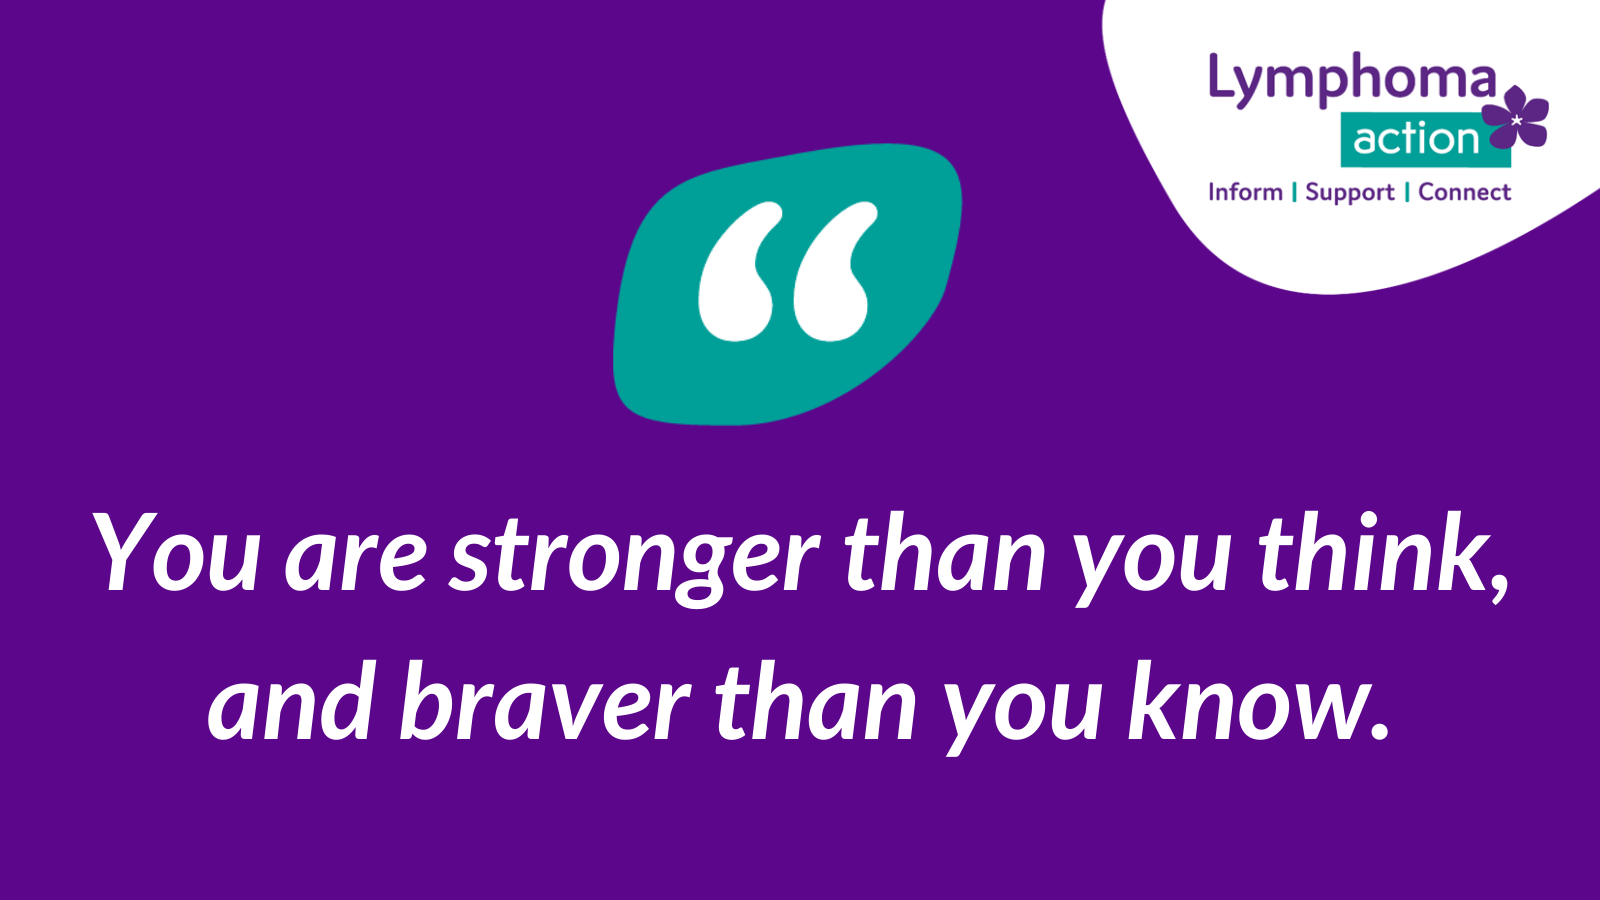 "You are stronger than you think and braver than you know"